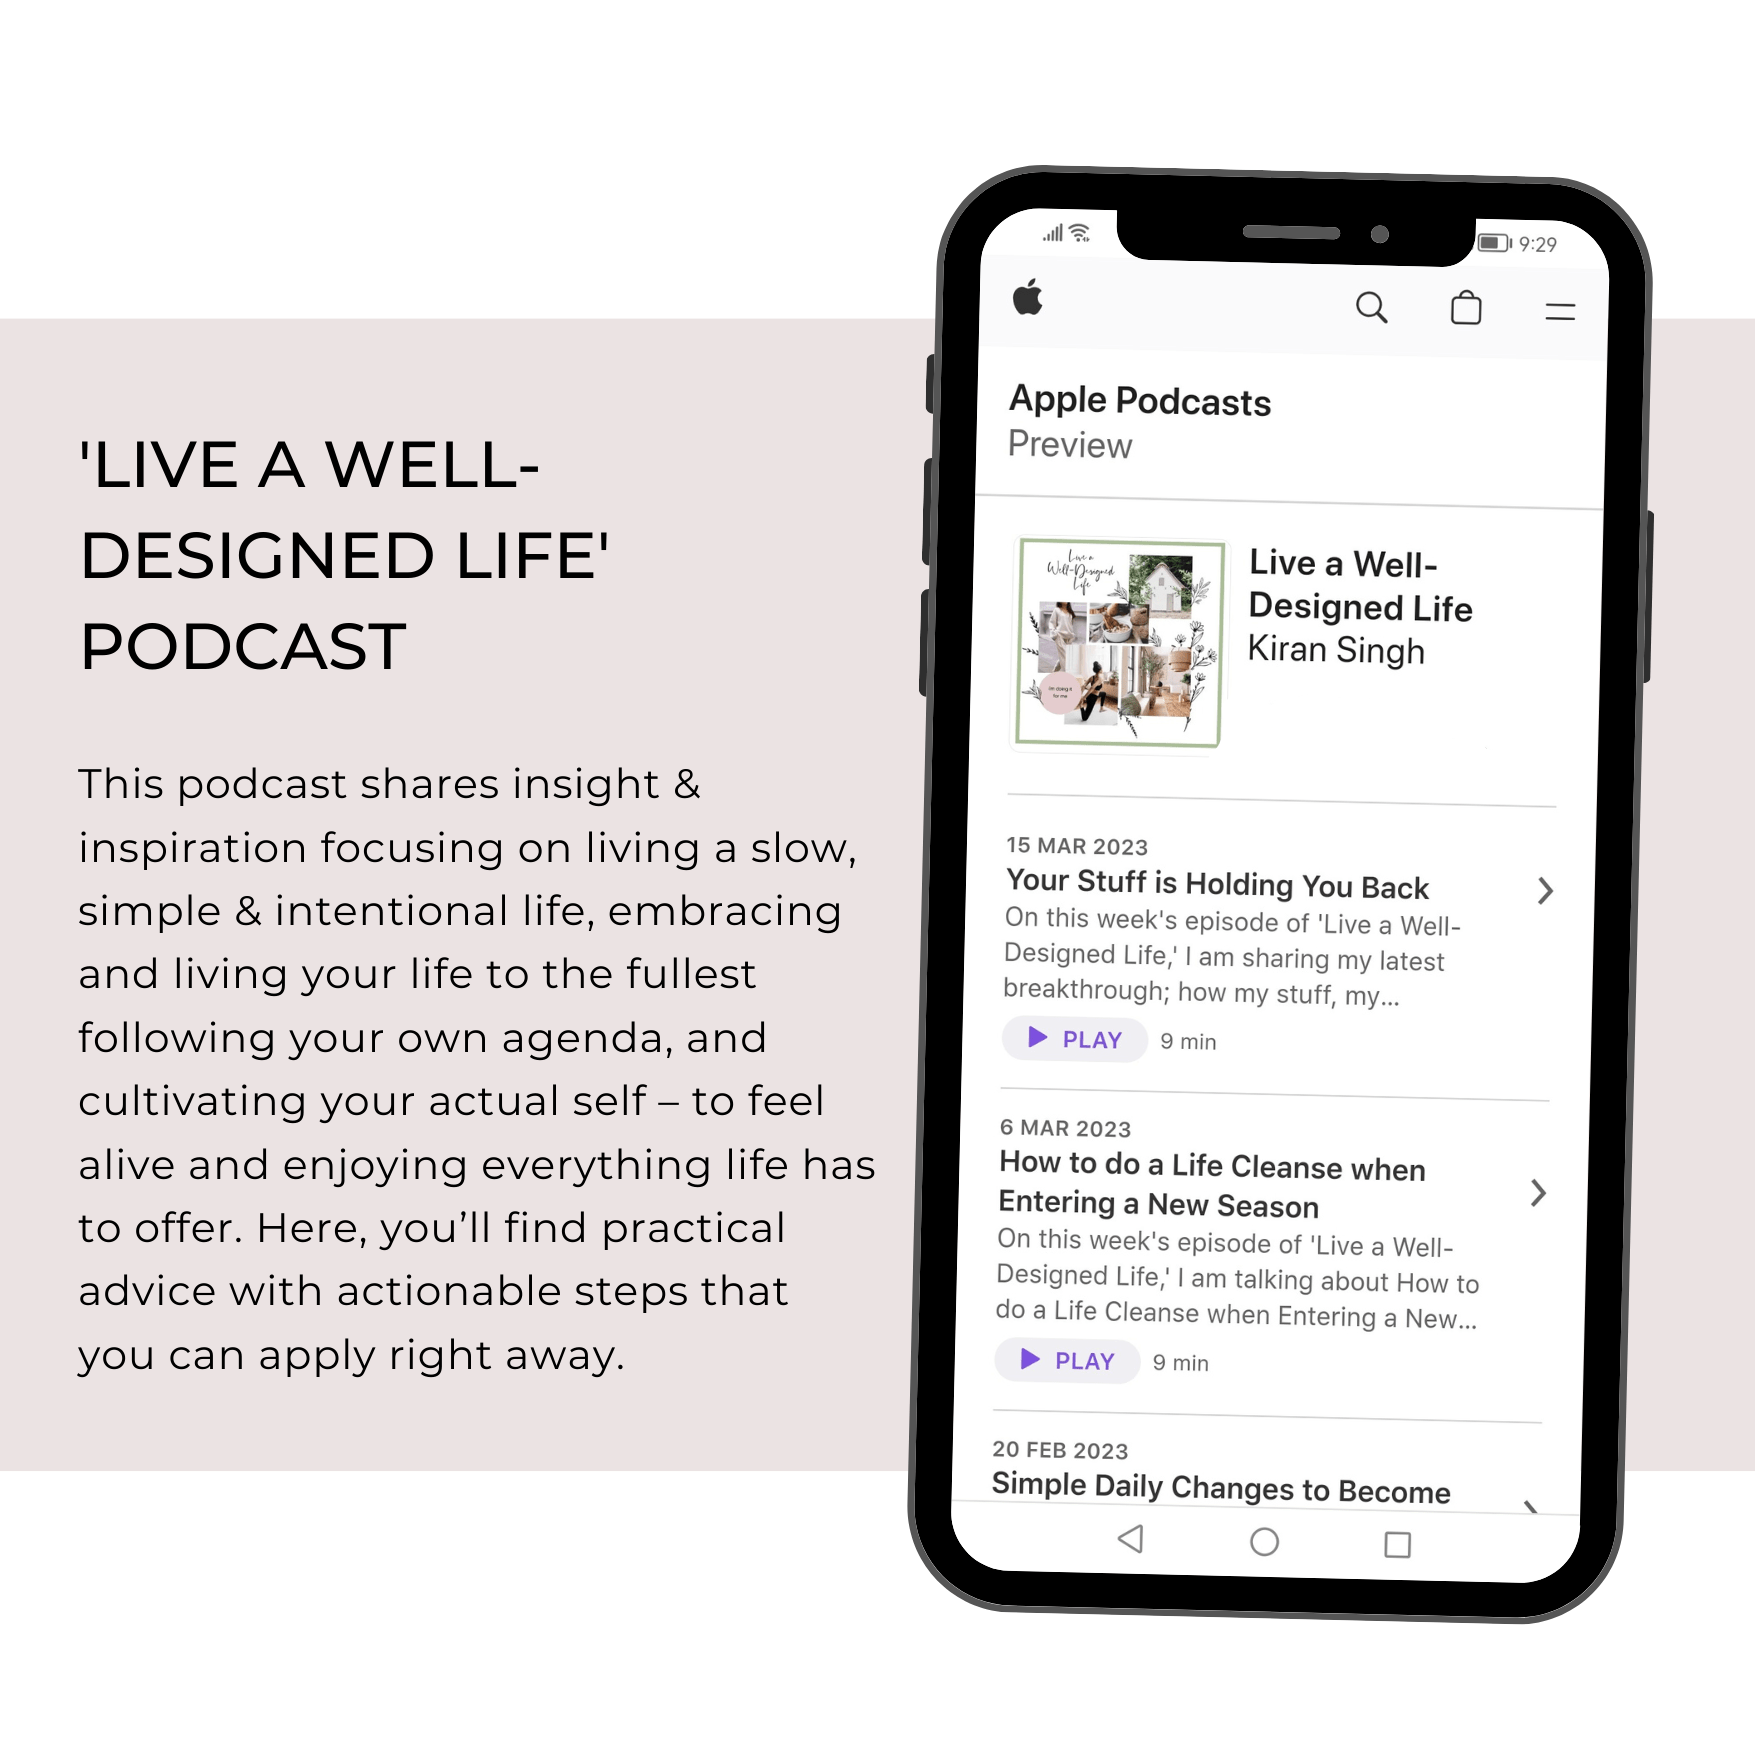 Live a Well-Designed Life Podcast